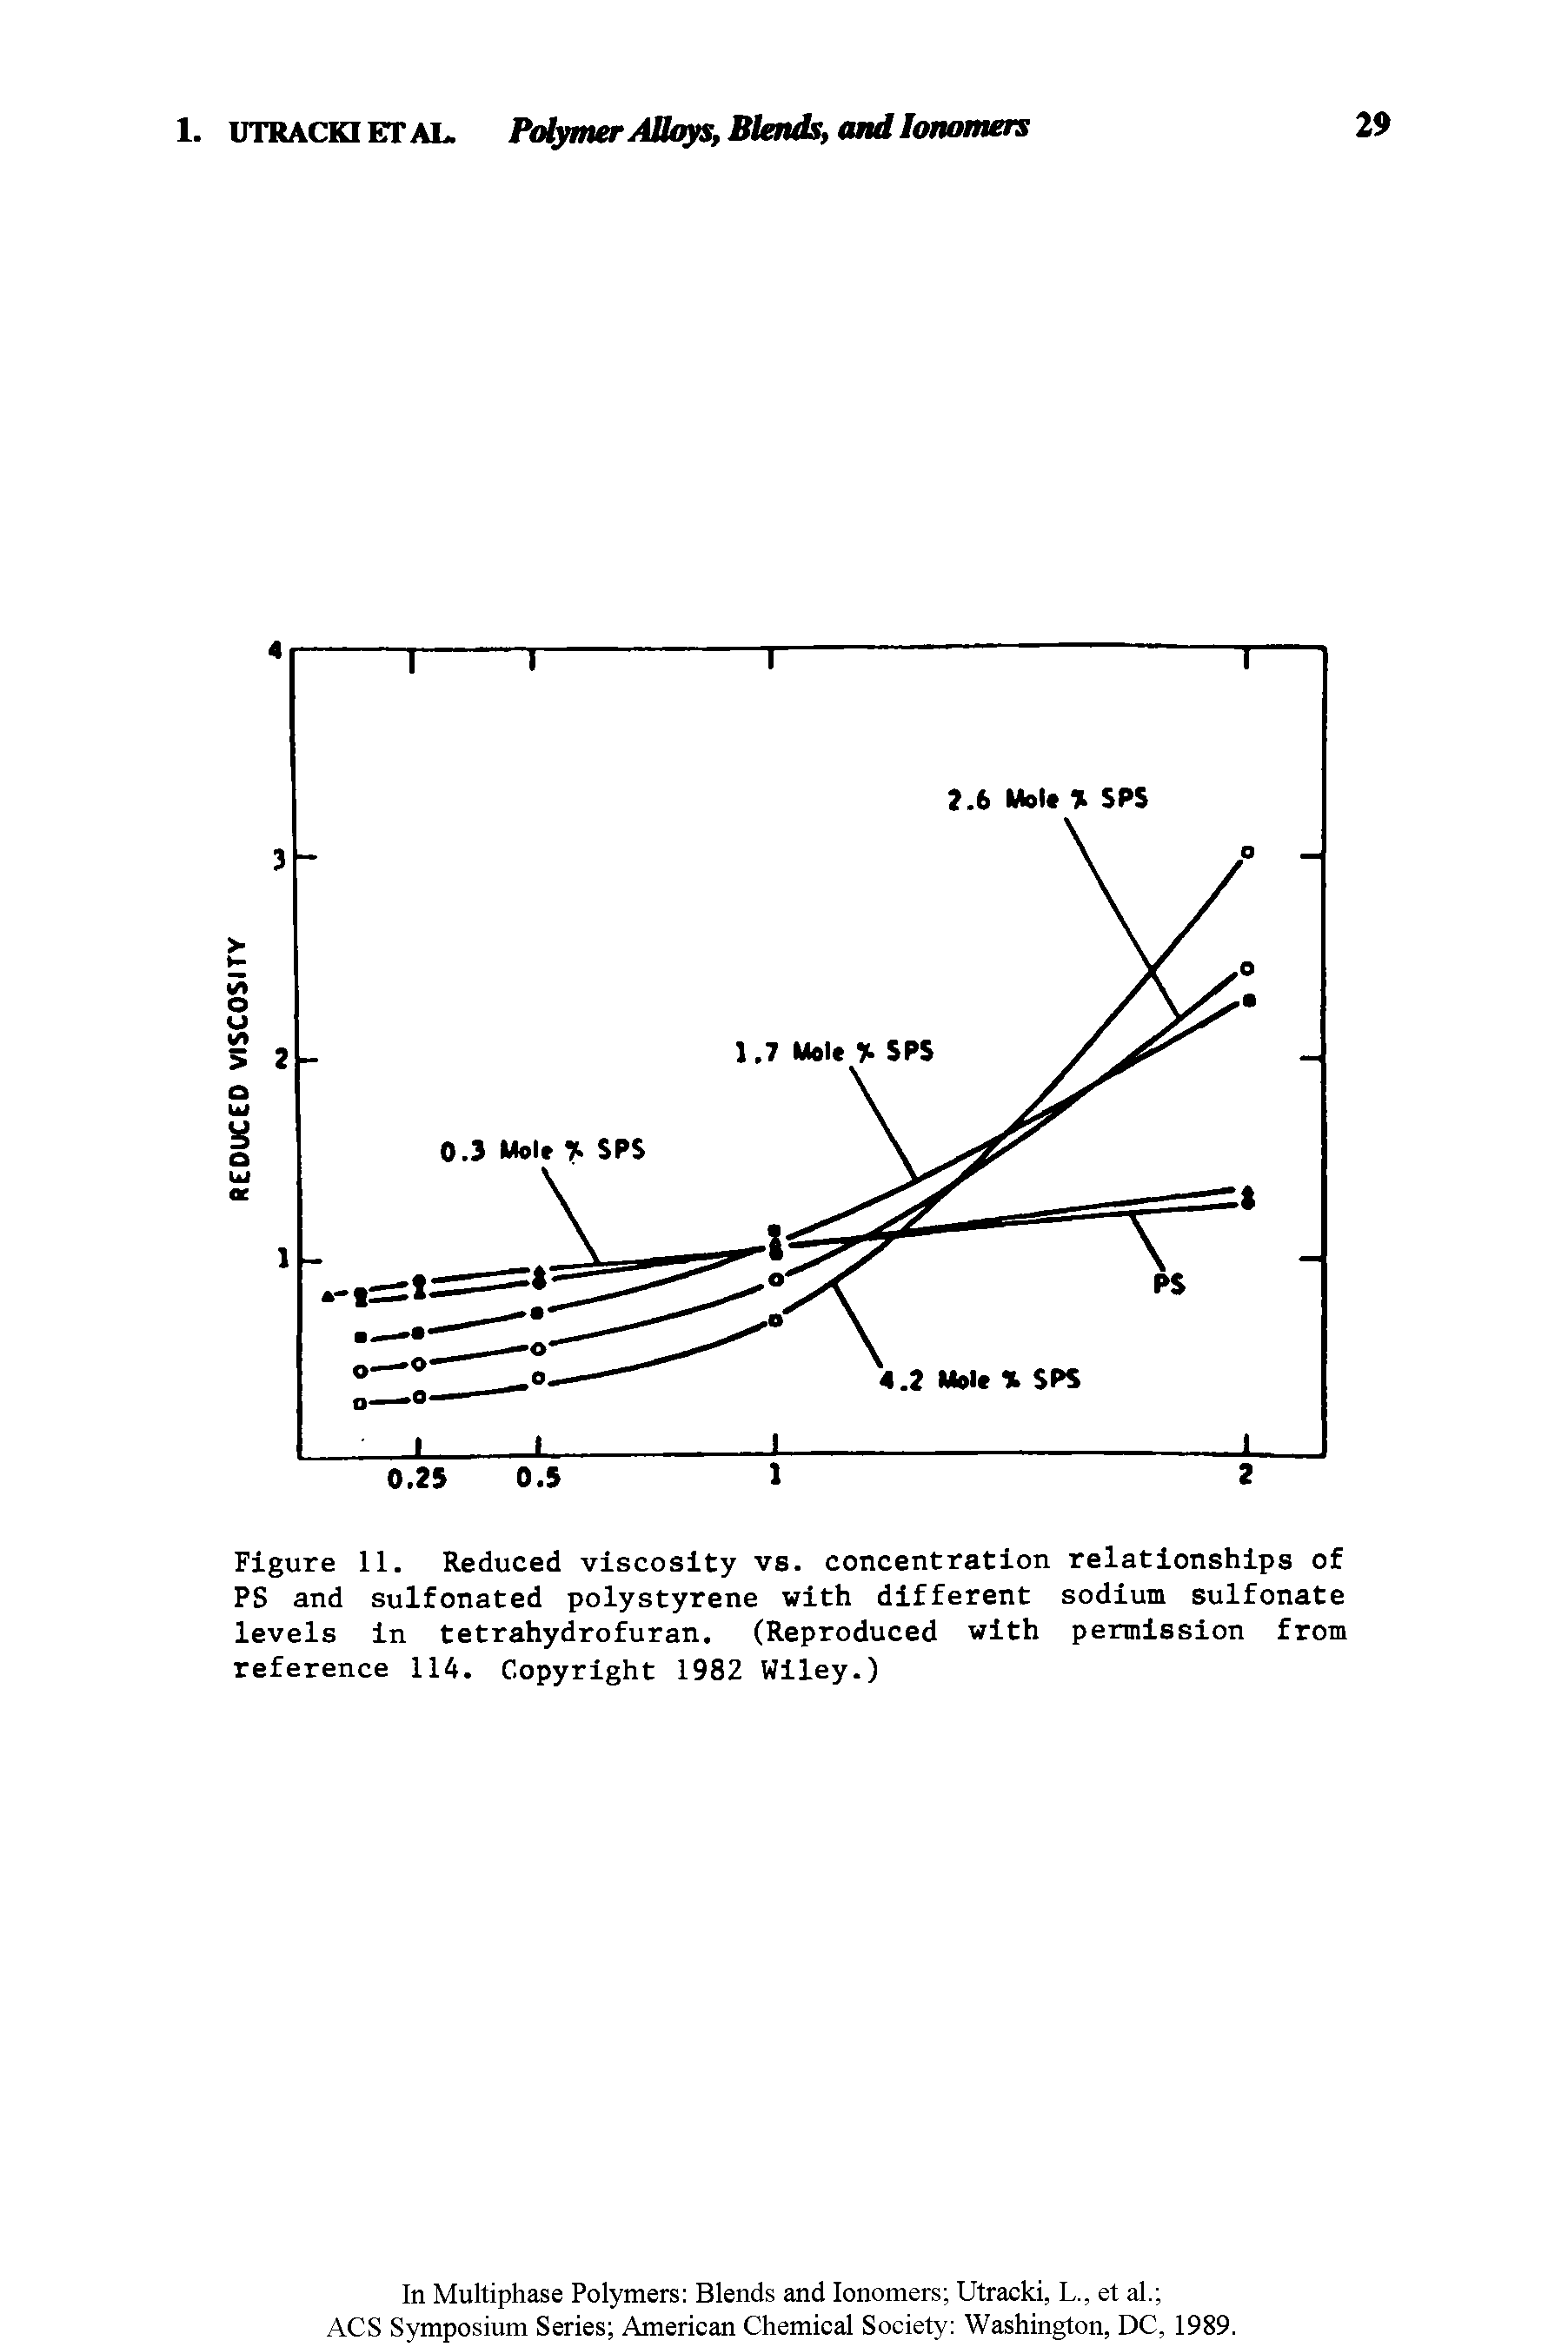 Figure 11. Reduced viscosity vs. concentration relationships of PS and sulfonated polystyrene with different sodium sulfonate levels in tetrahydrofuran. (Reproduced with permission from reference 114. Copyright 1982 Wiley.)...